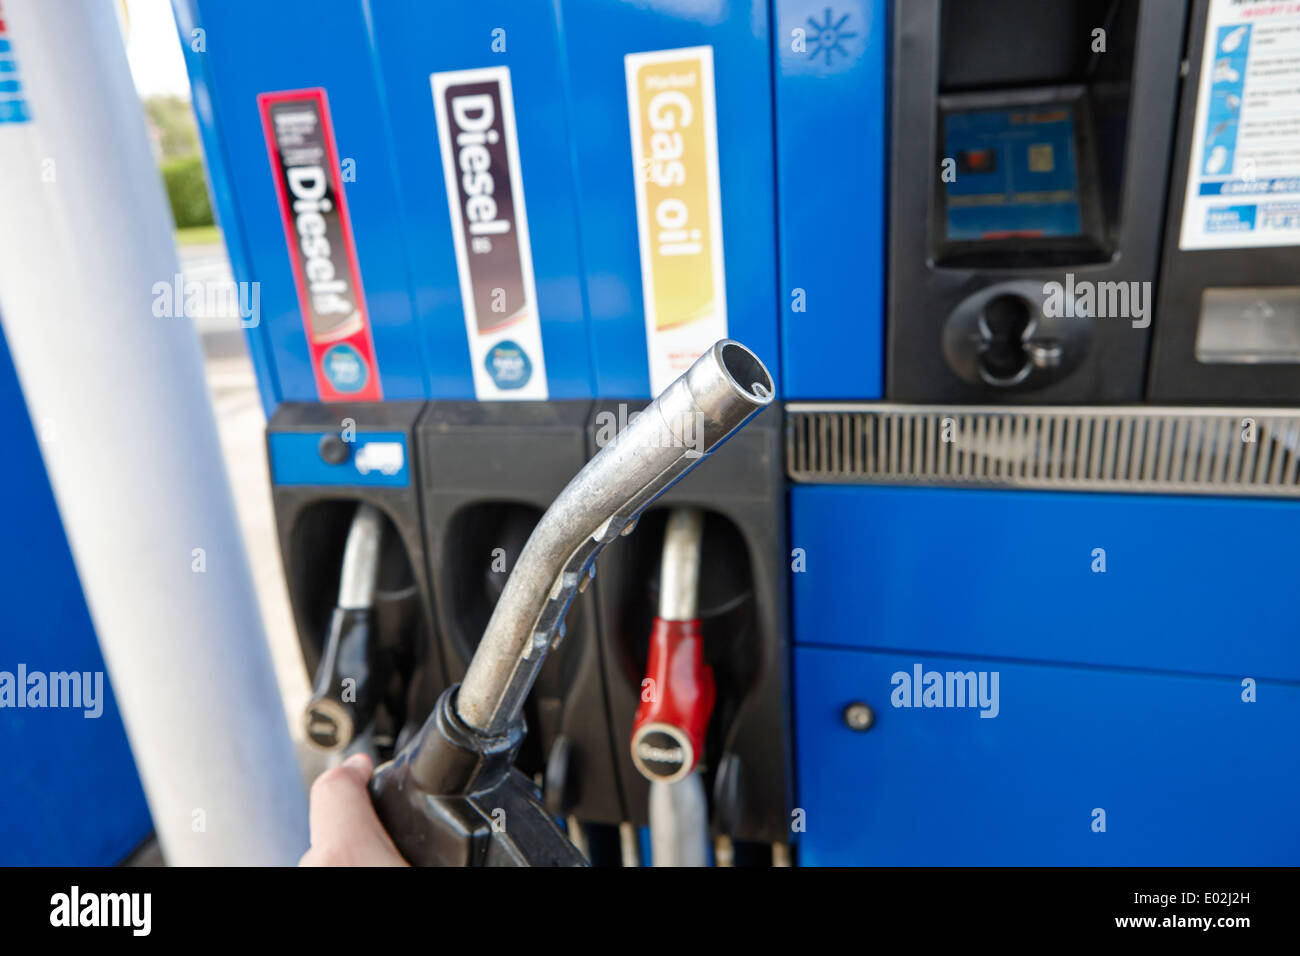 man holding refueling nozzle at gas oil diesel and high speed biofuel diesel pumps at a petrol station northern ireland Stock Photo